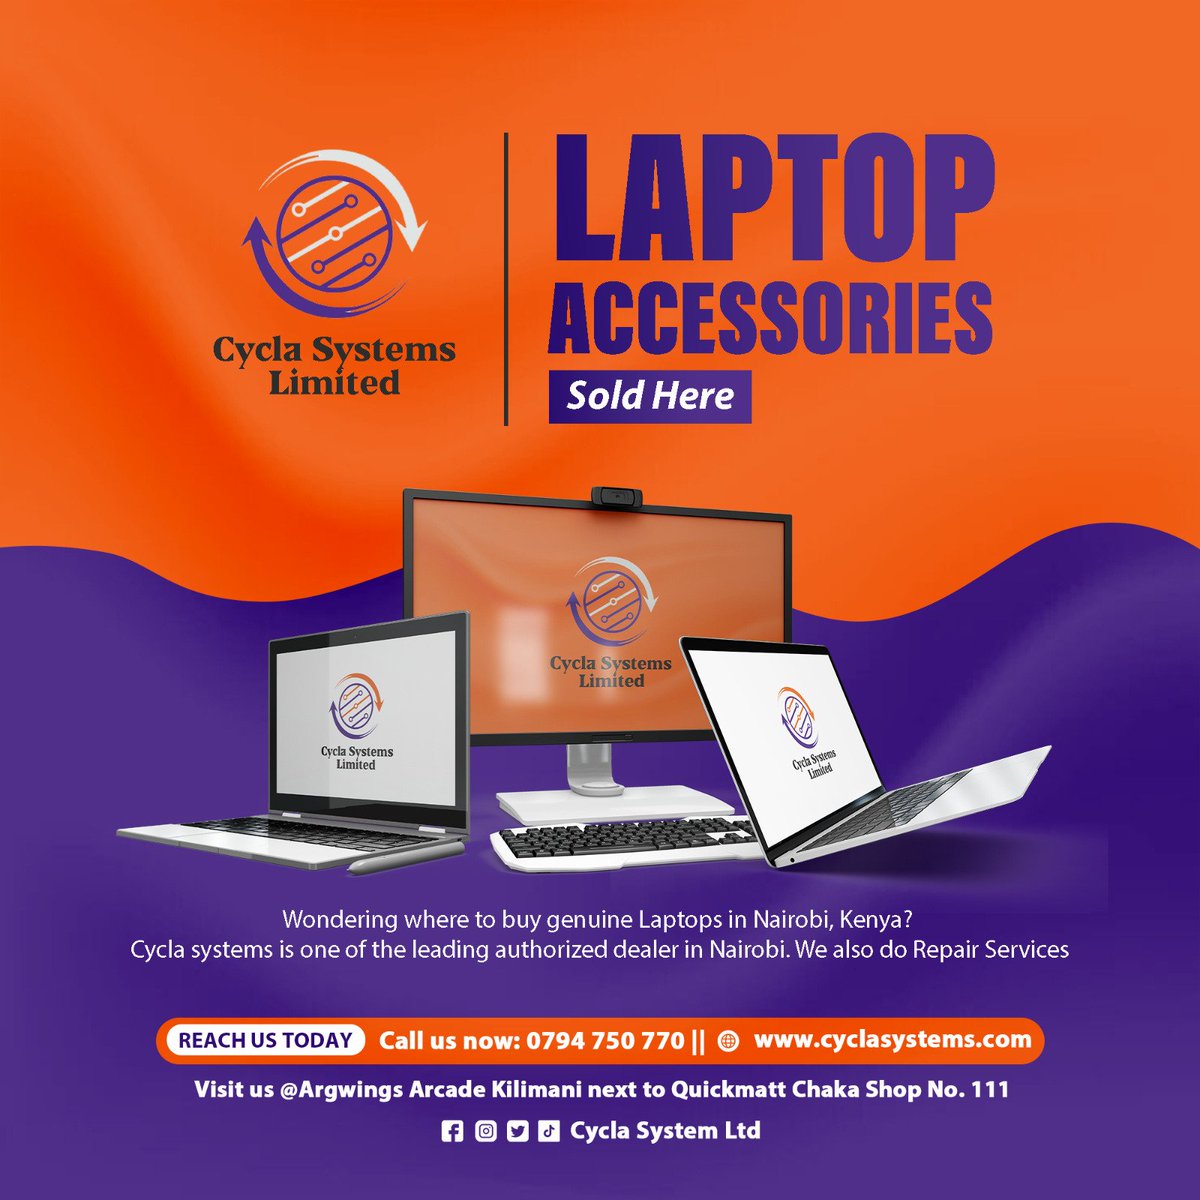 Looking for laptop accessories!!!
Visit our shop Argwings Arcade Kilimani 
 Call us on / WhatsApp 0794 750770 
#scaleupwithcycla #laptopssaleskenya #laptopsale #laptopsinnairobi #Computer #computershop #laptops #kilimaninairobi #kilimani #accessories #laptopbag #laptopaccessories